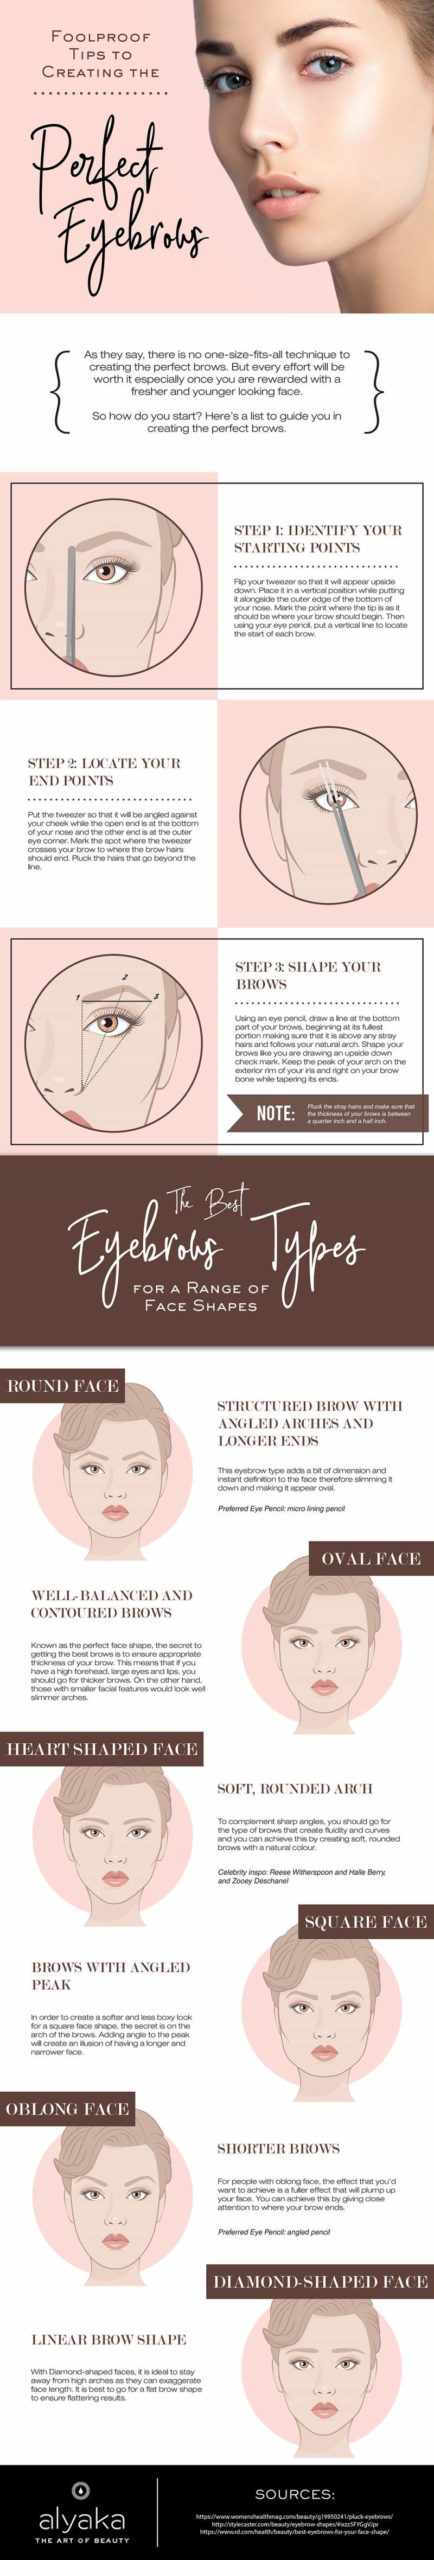 eyebrow-types-and-shapes